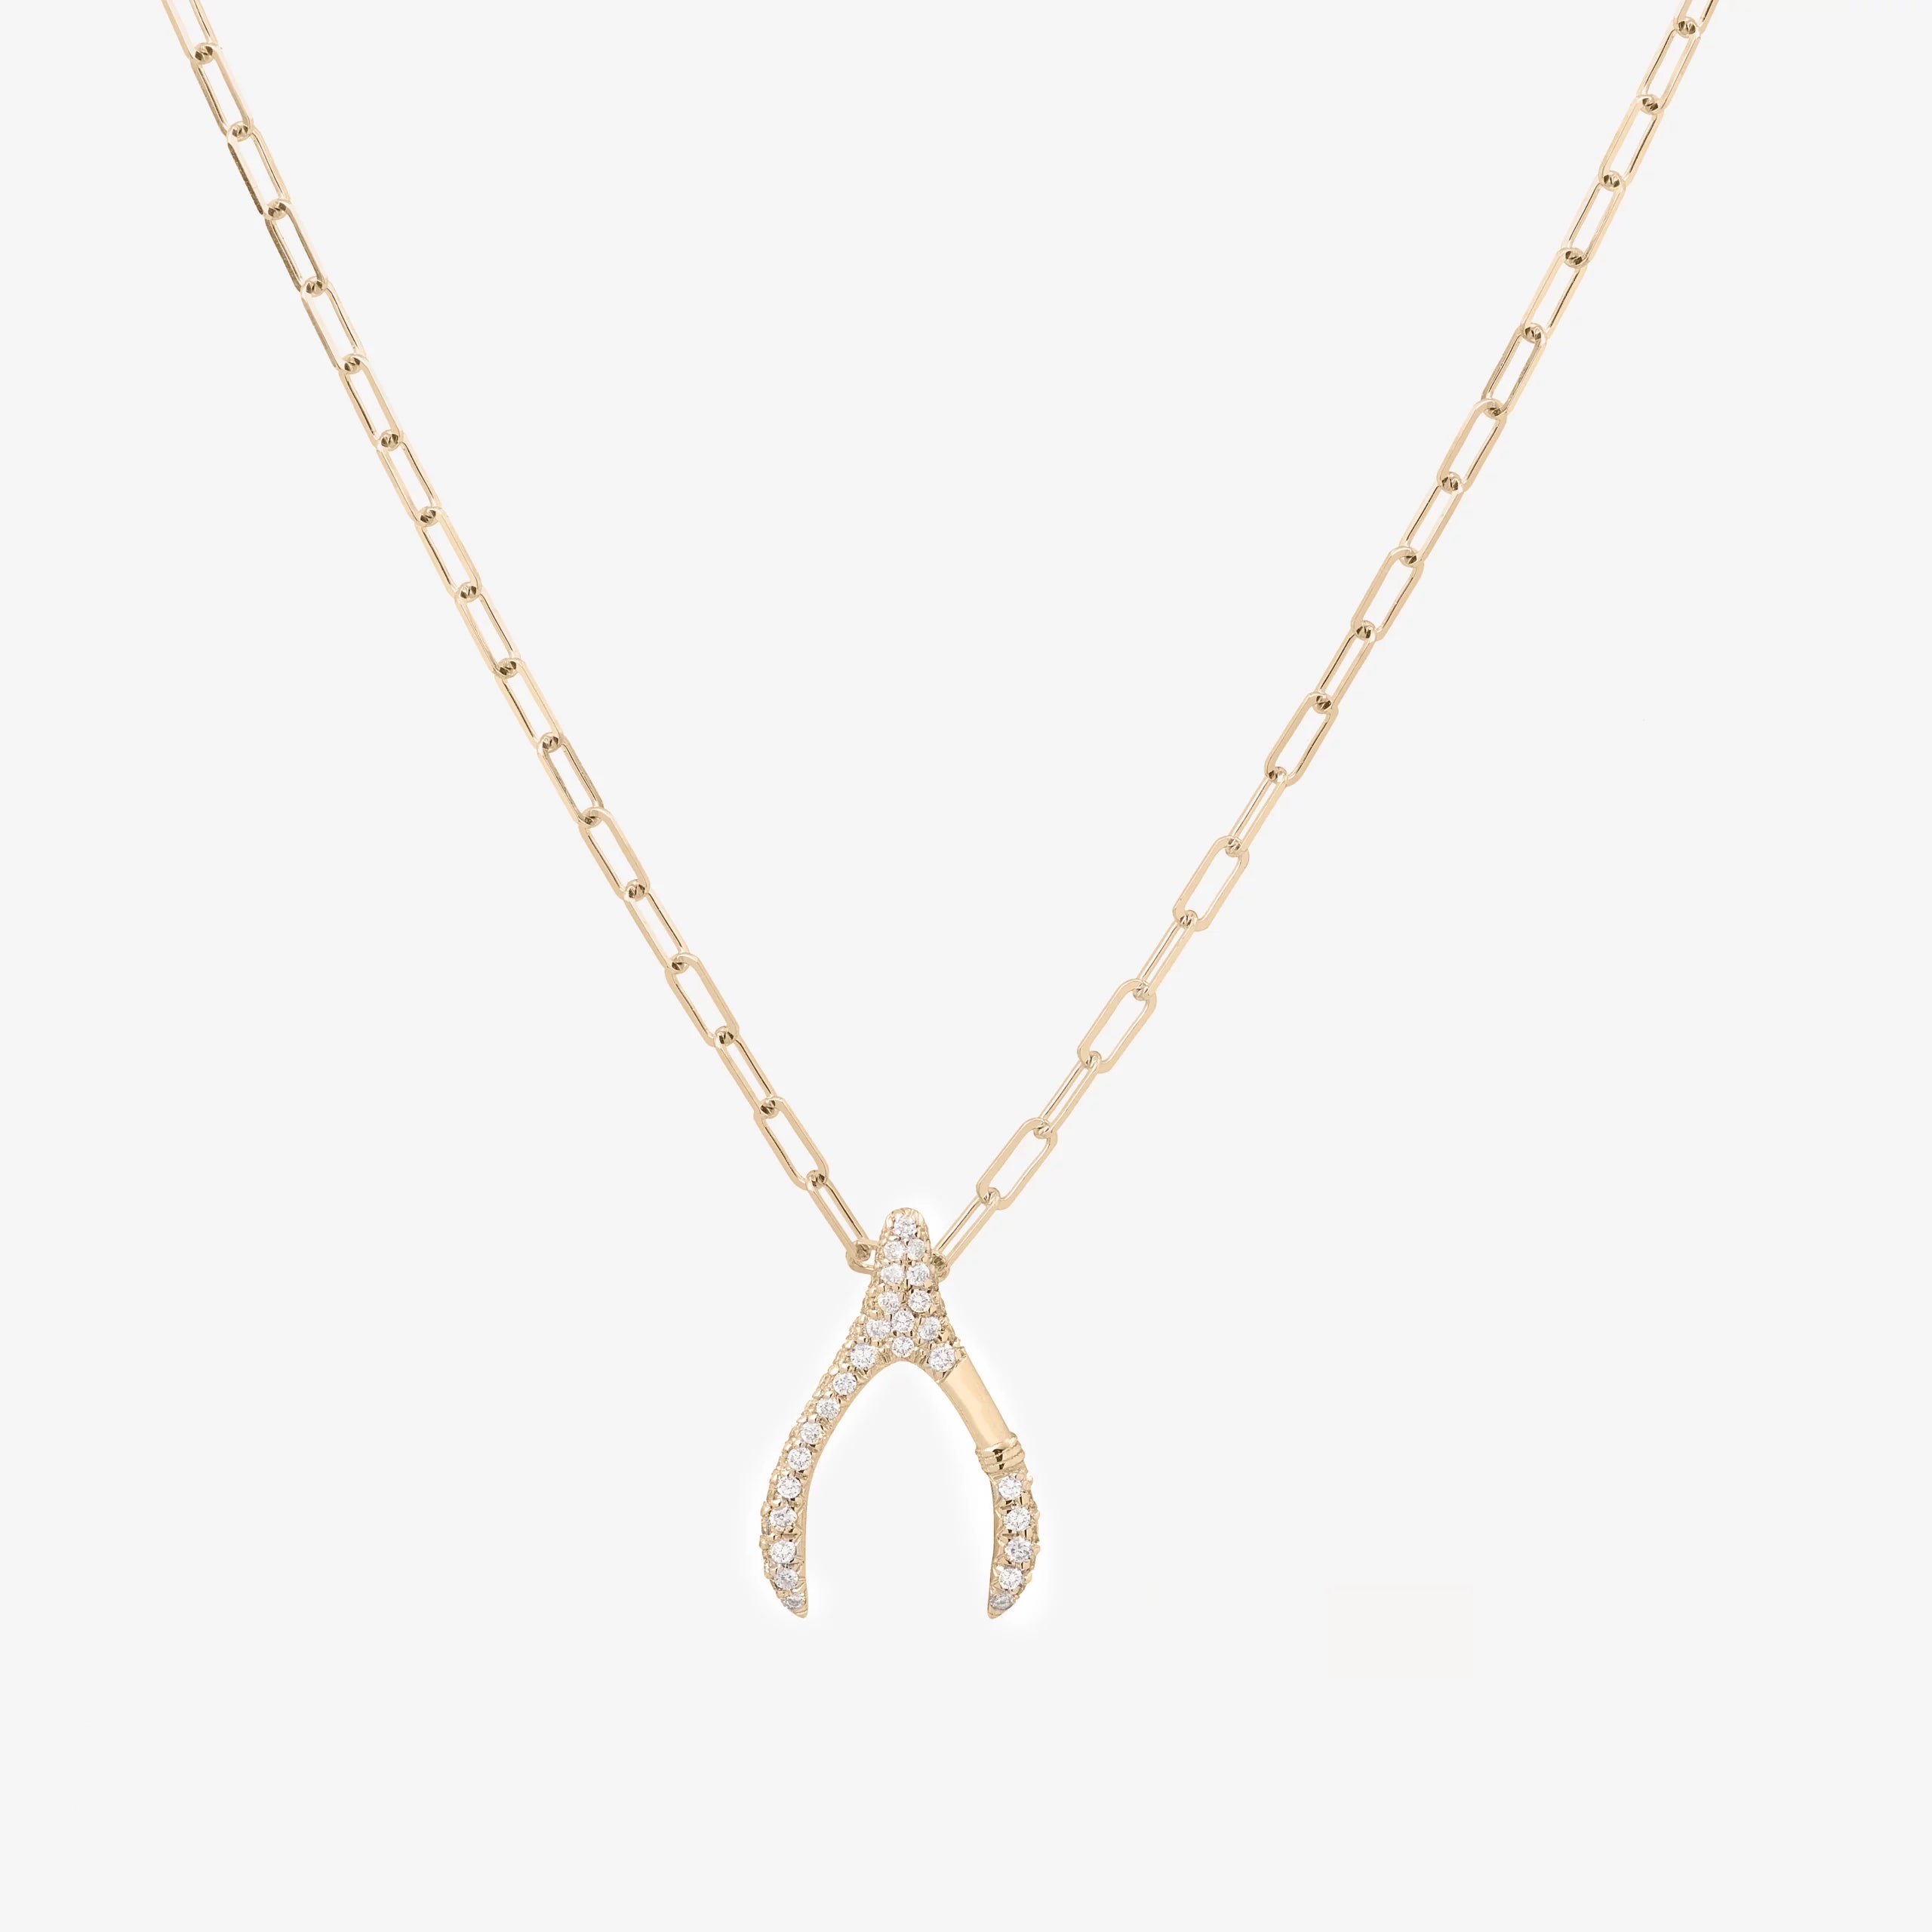 Collier wishbone PM or jaune vue face